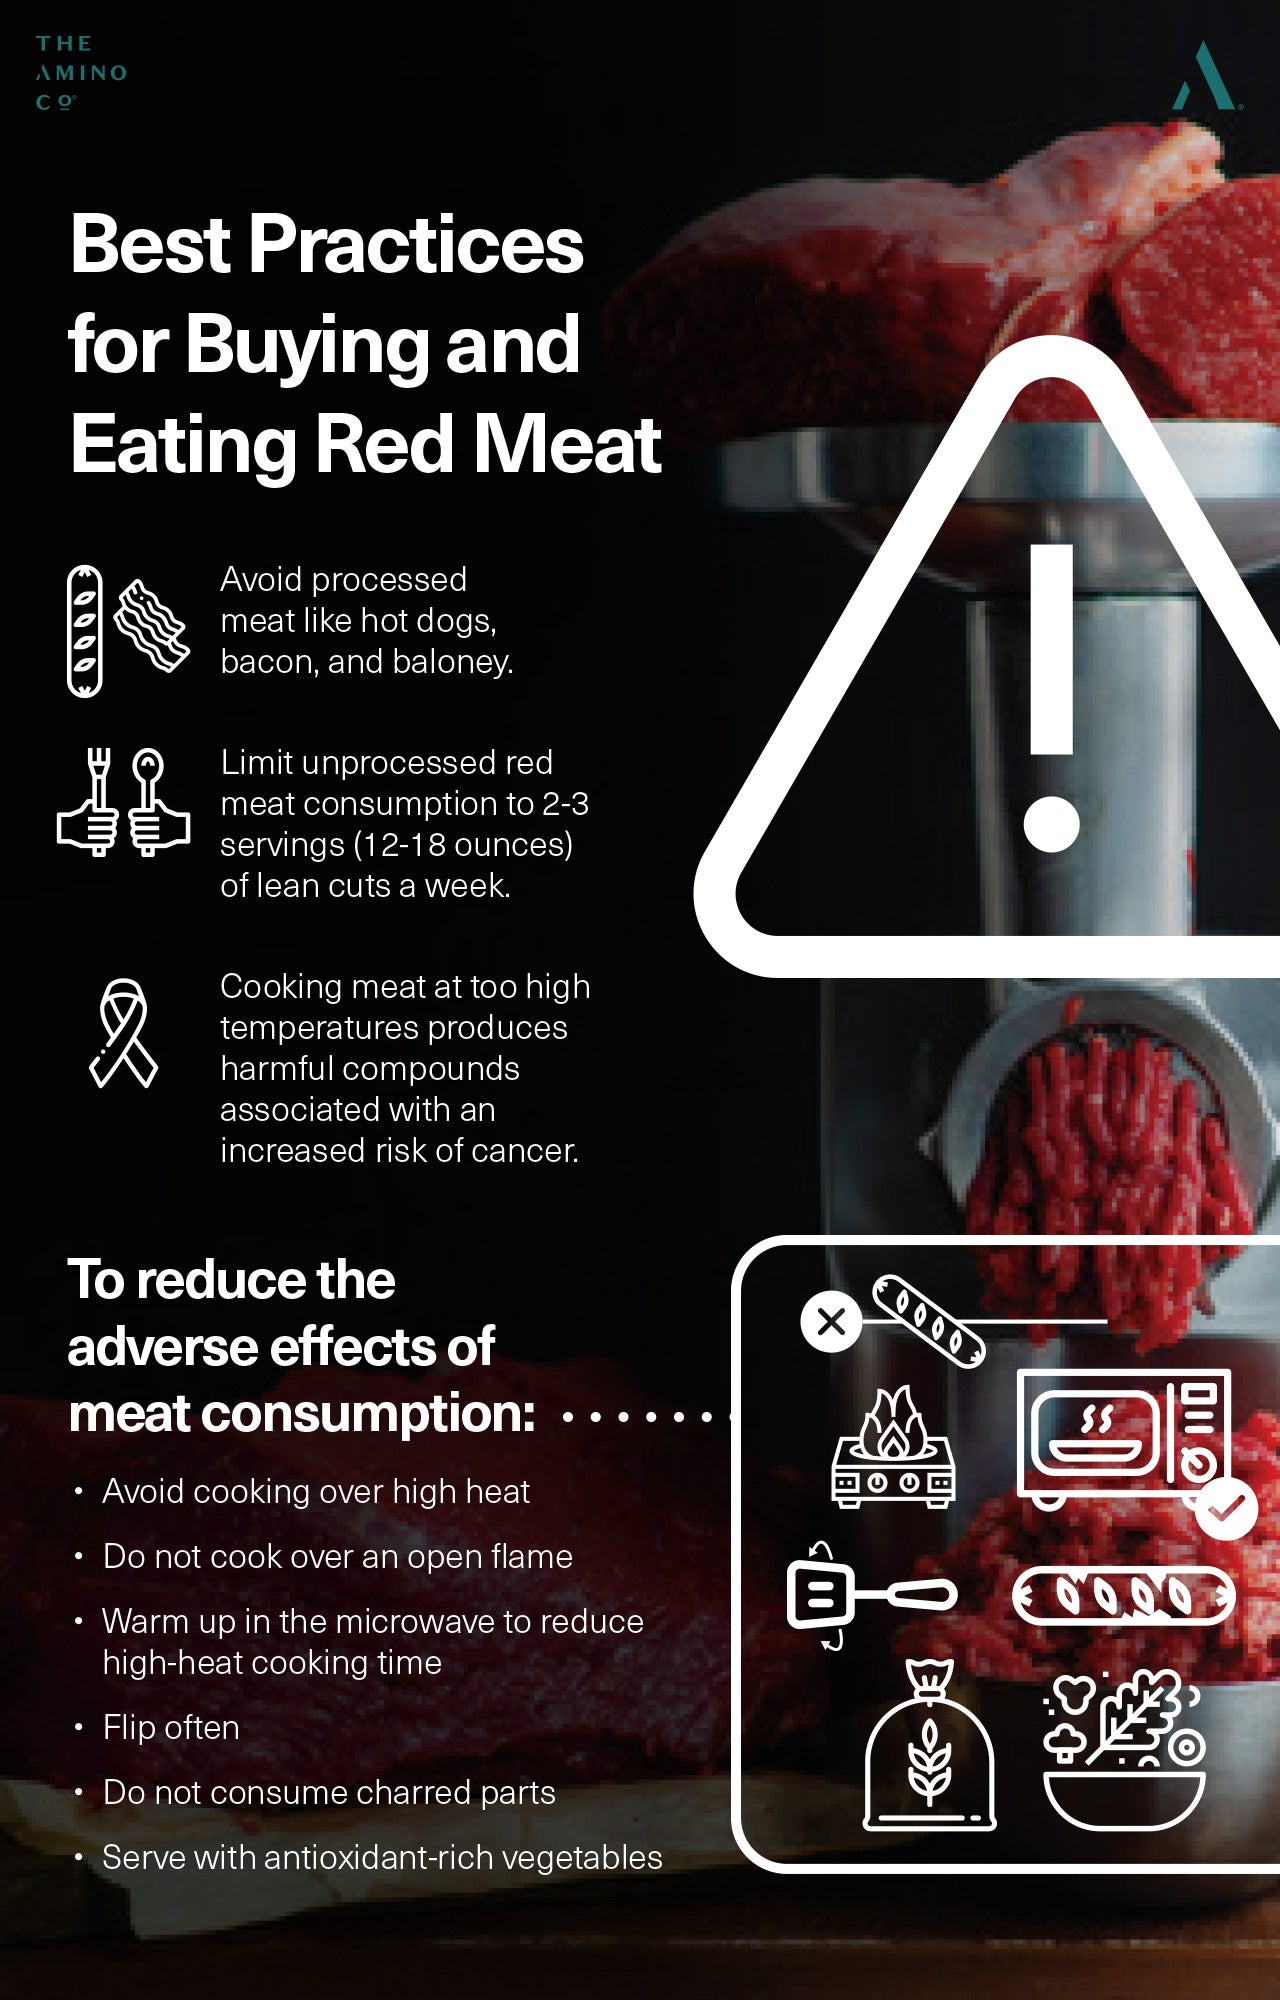 Best Practices for Buying and Eating Red Meat